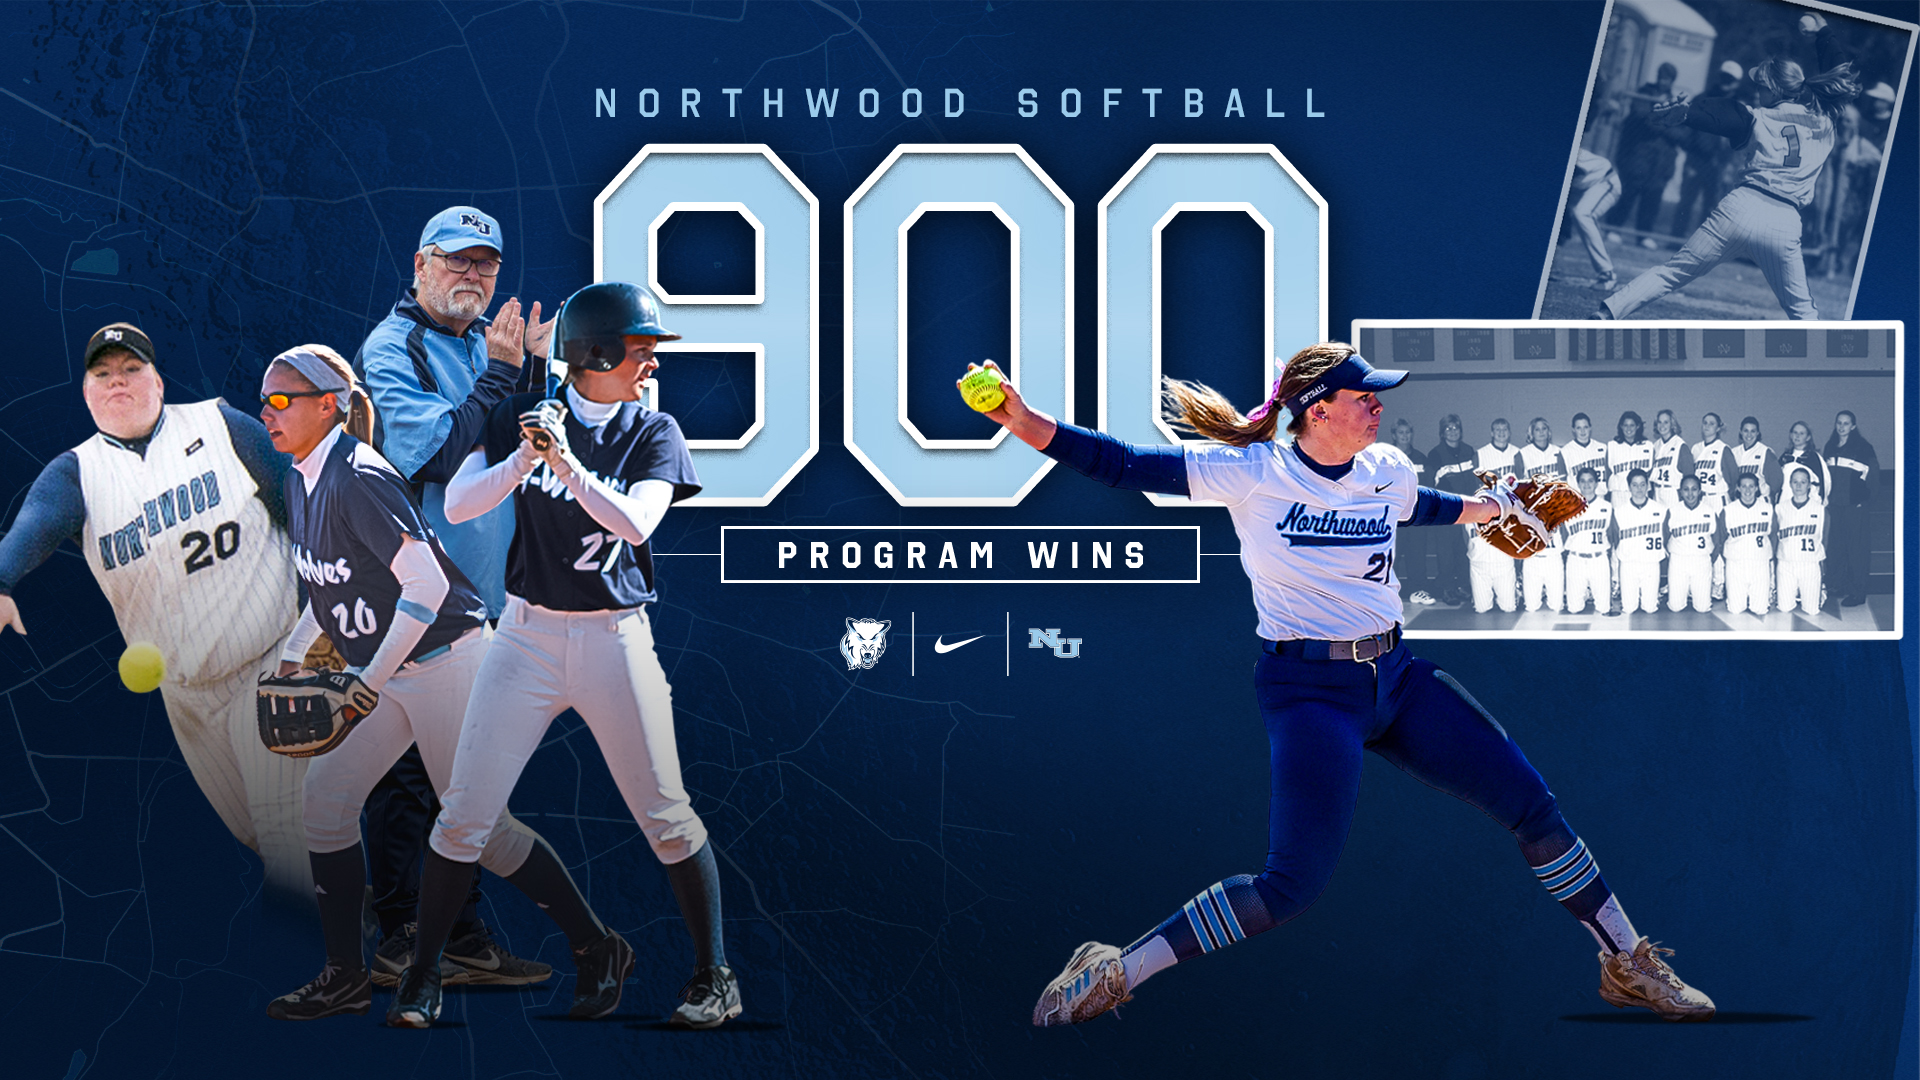 Schloop Walks It Off Versus DU, 3-2, As Softball Gets Program Win No. 900 While Going 3-0 At MCI